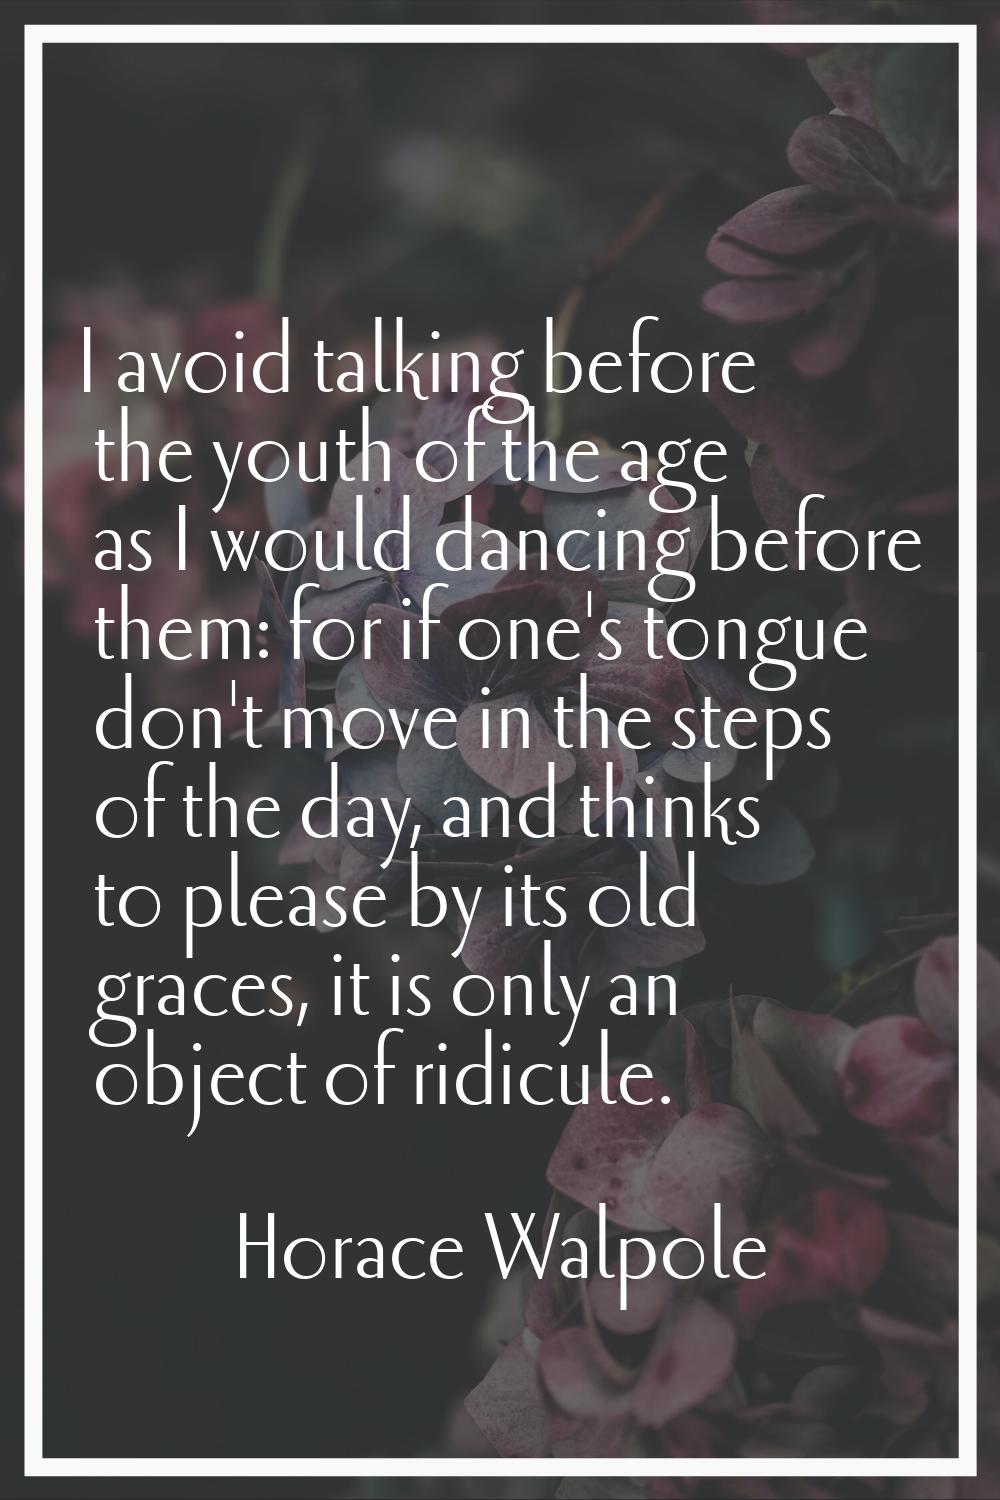 I avoid talking before the youth of the age as I would dancing before them: for if one's tongue don